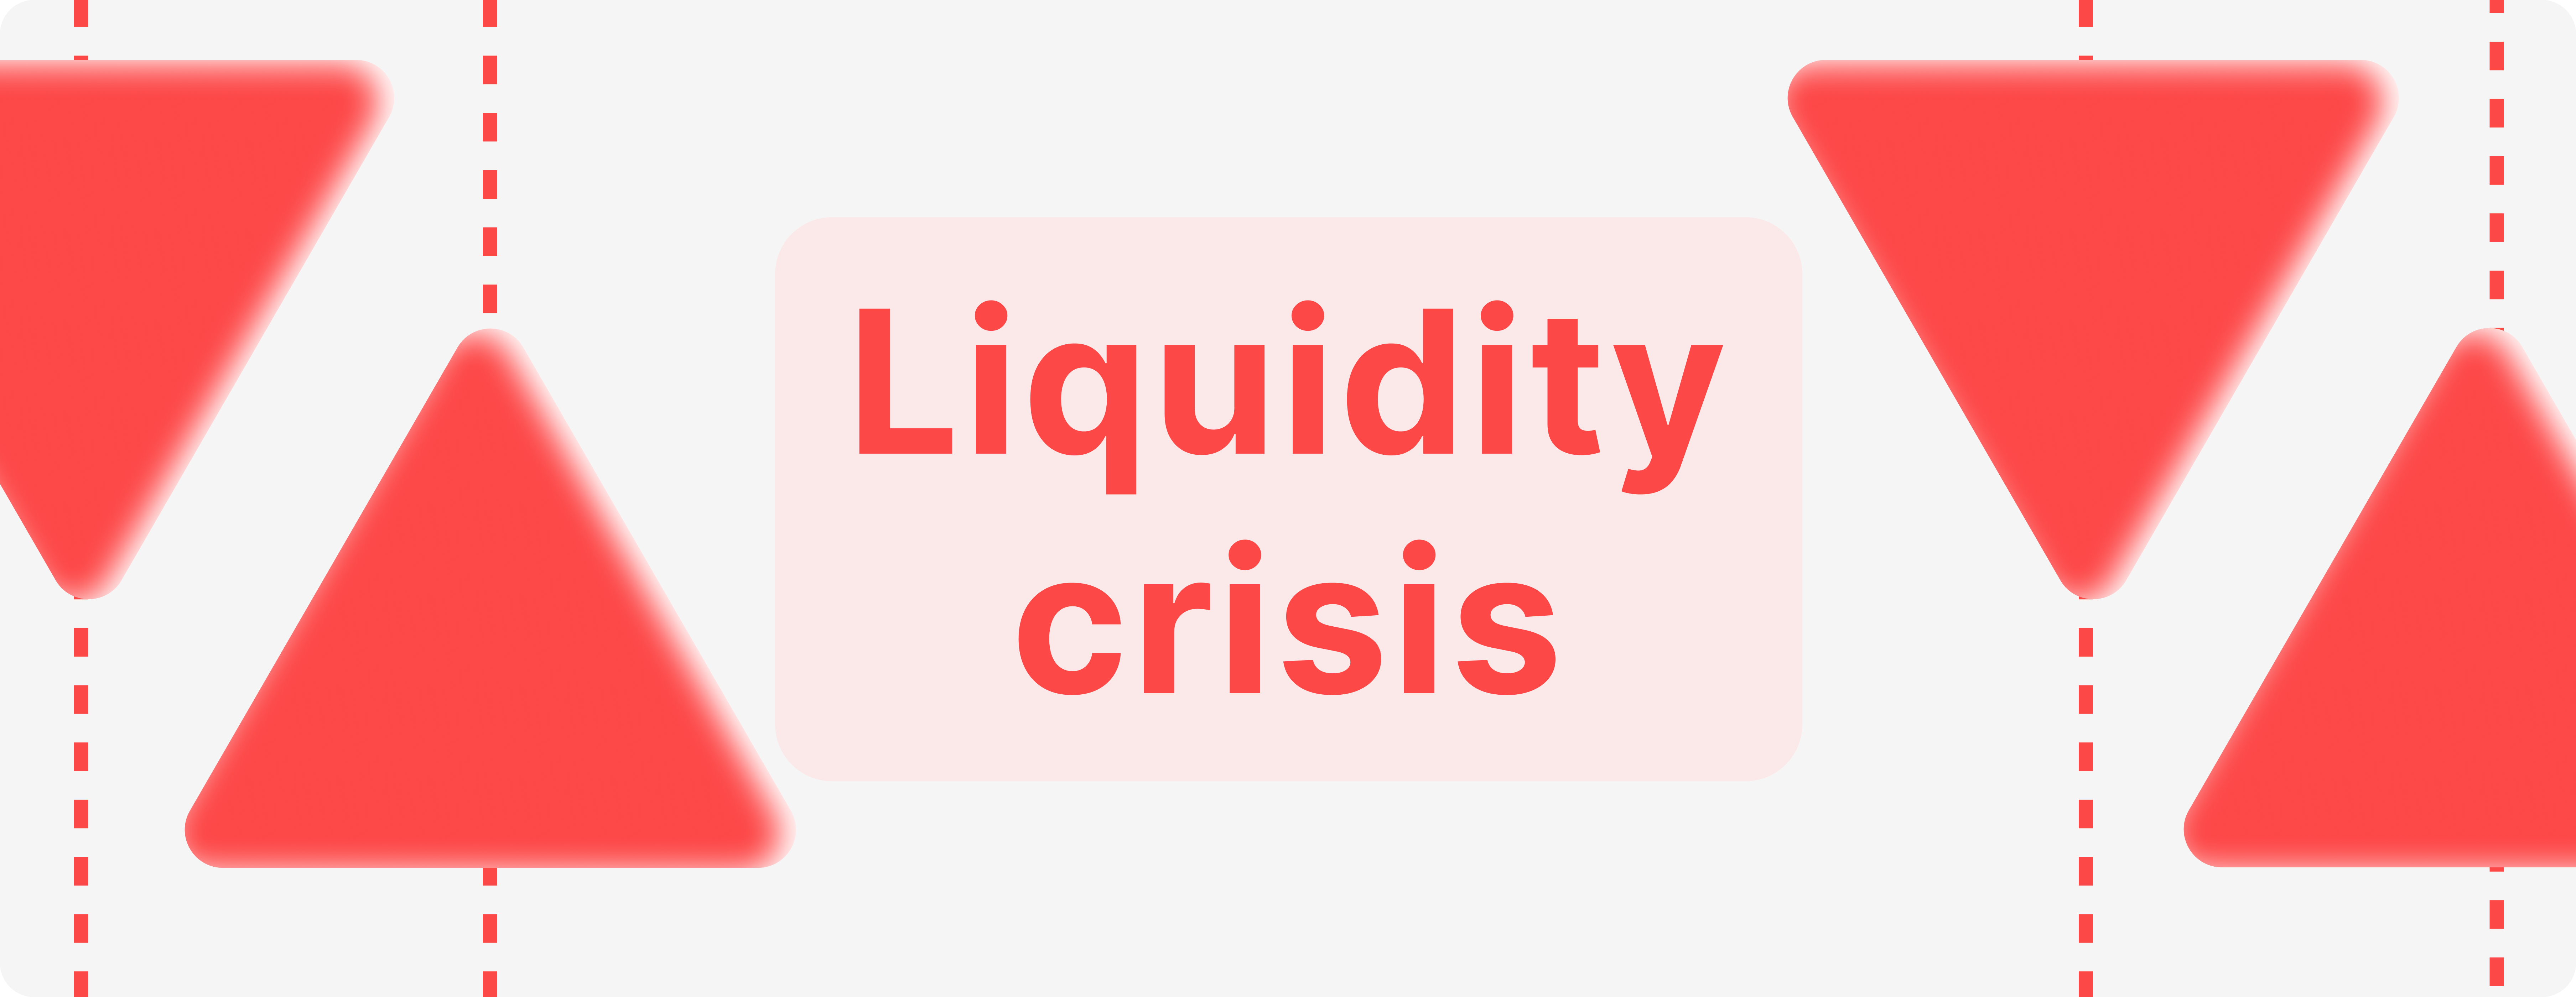 Understanding Liquidity Crisis And How To Avoid It